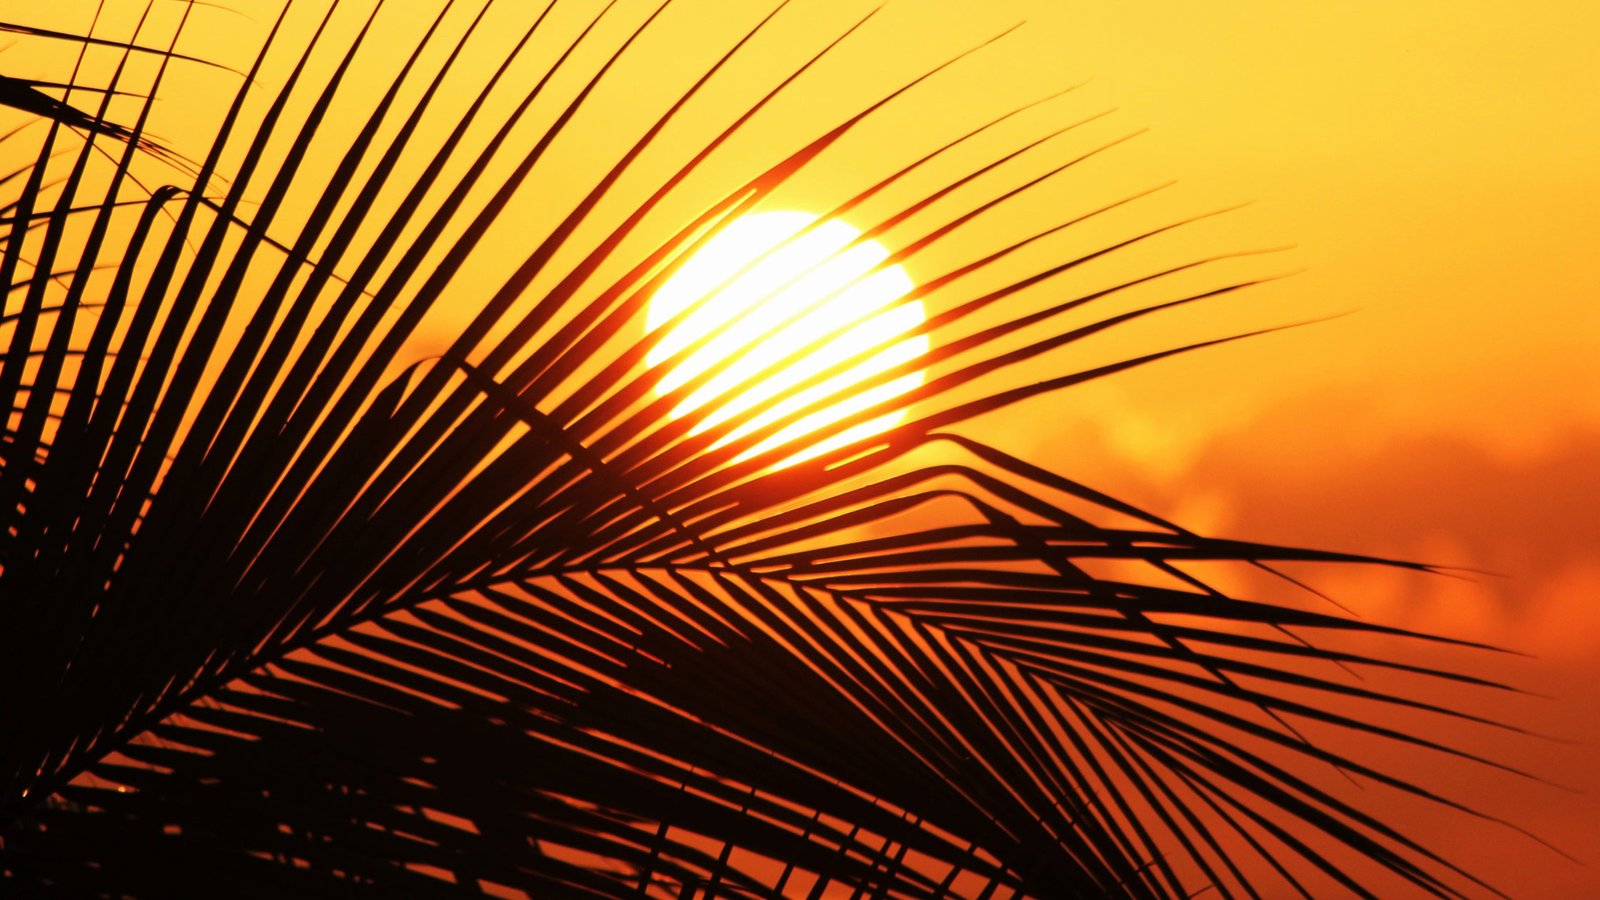 A bright sun with palm leaves as foreground